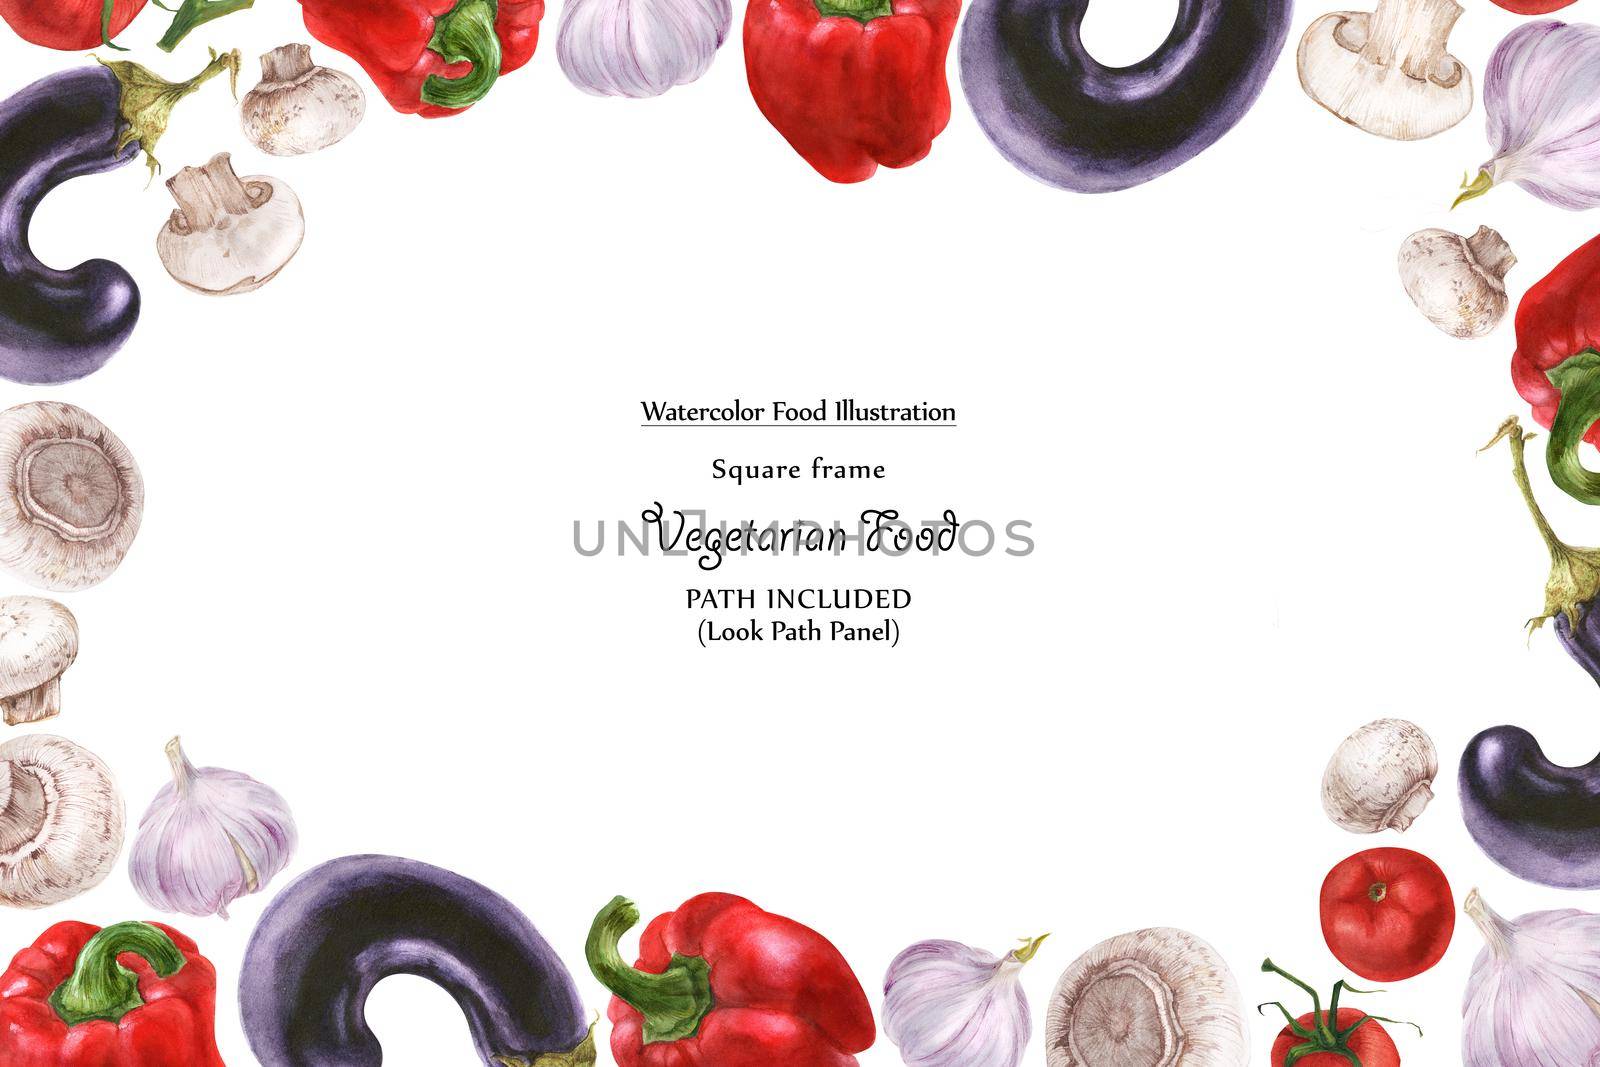 Watercolor wide vegan frame by freshness eggplant,mushroom, tomato, pepper and garlic. Isolated, clipping path included, vegan design